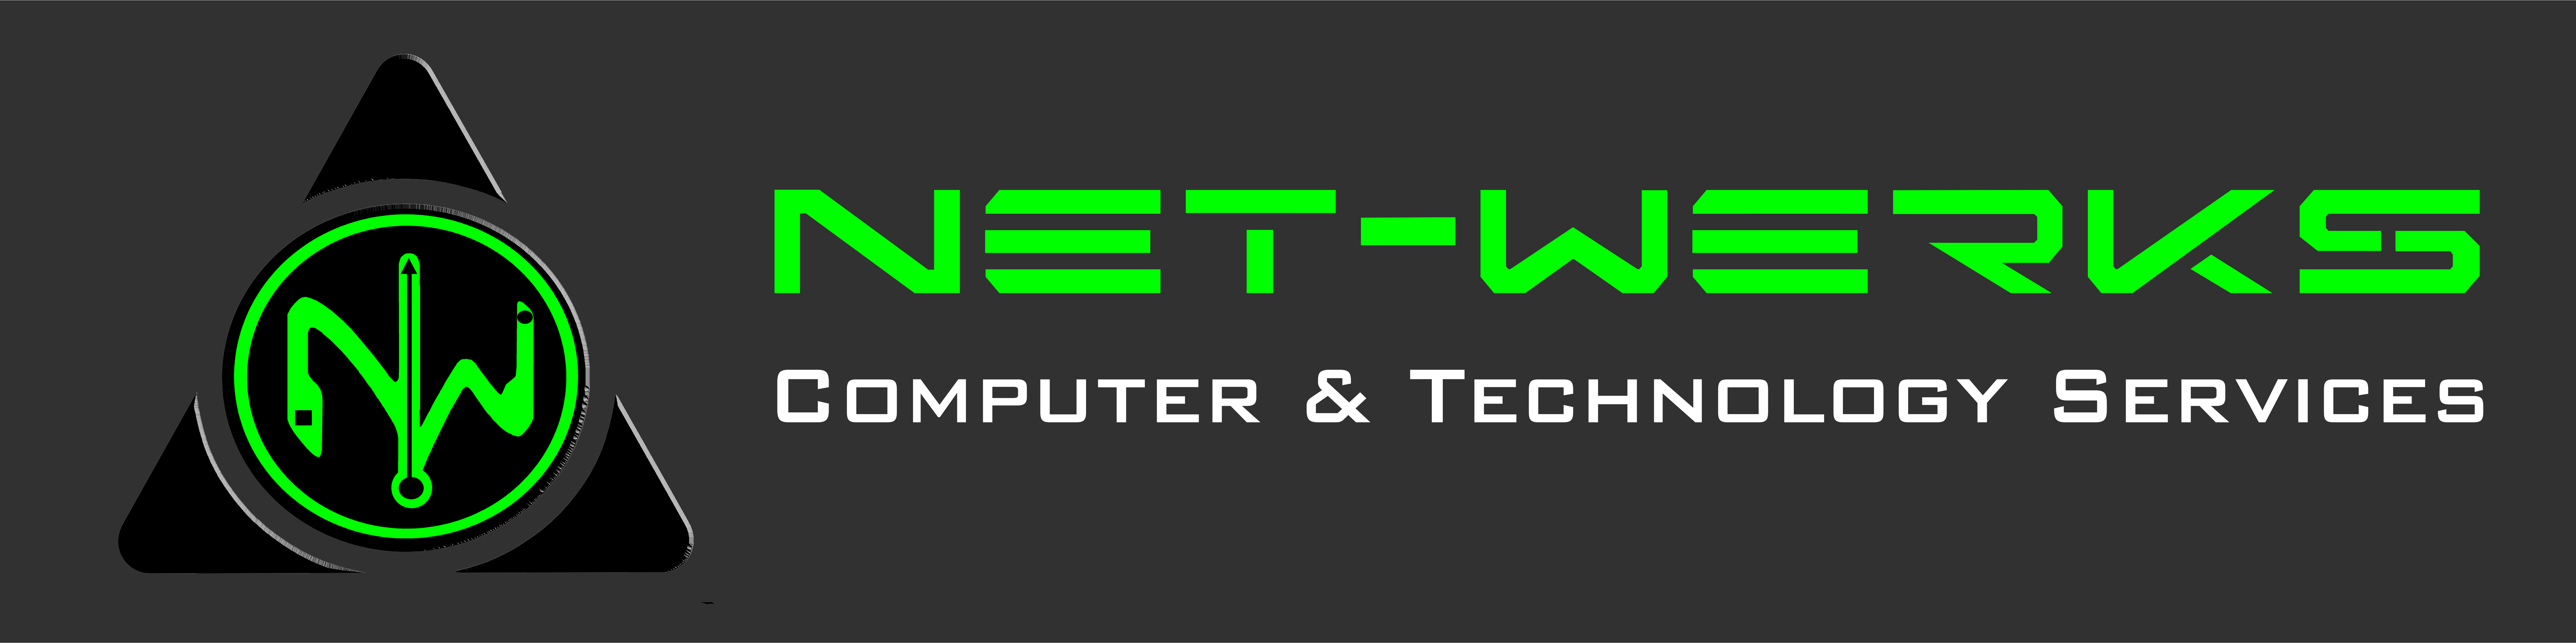 Net-werks Computer and Tech Services/ Shipping Outlet